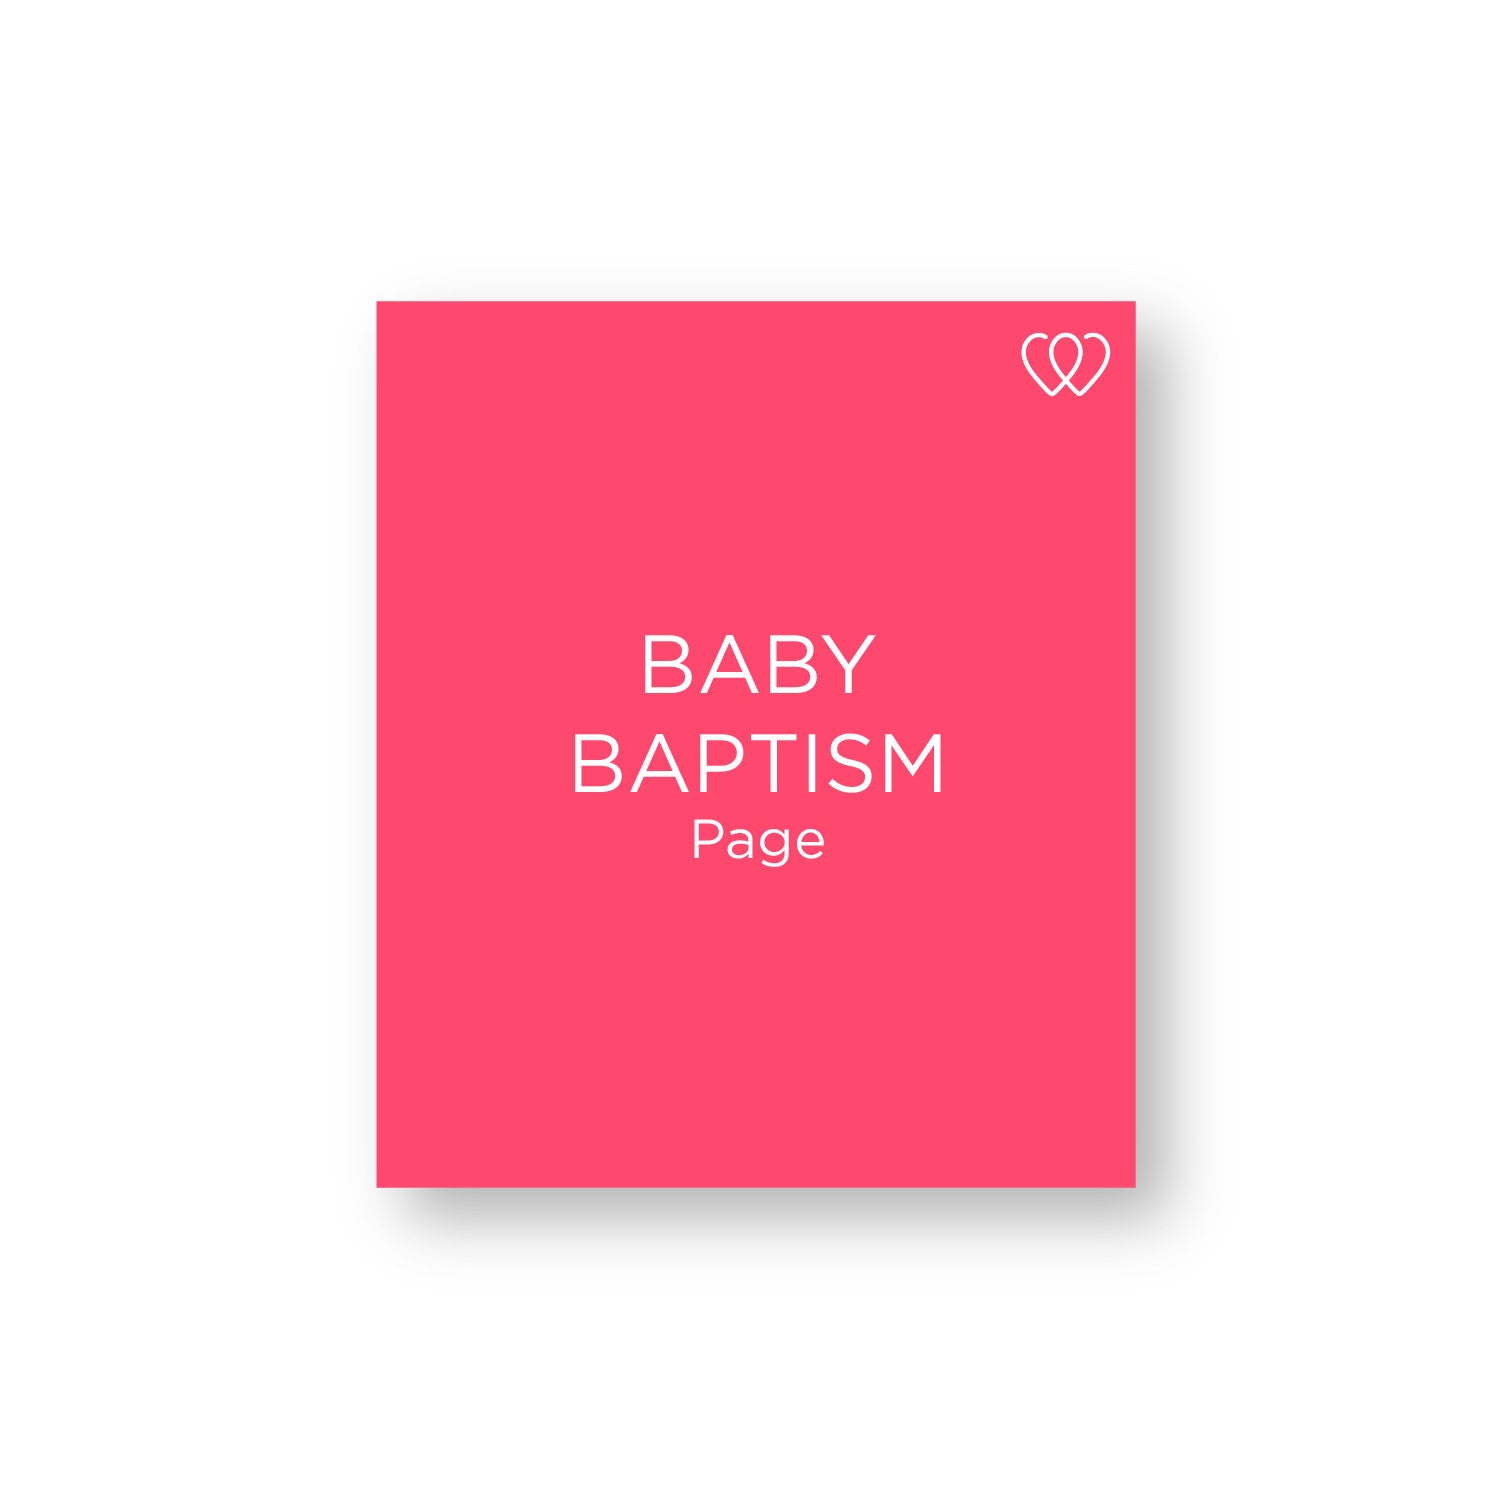 Baby Baptism Page